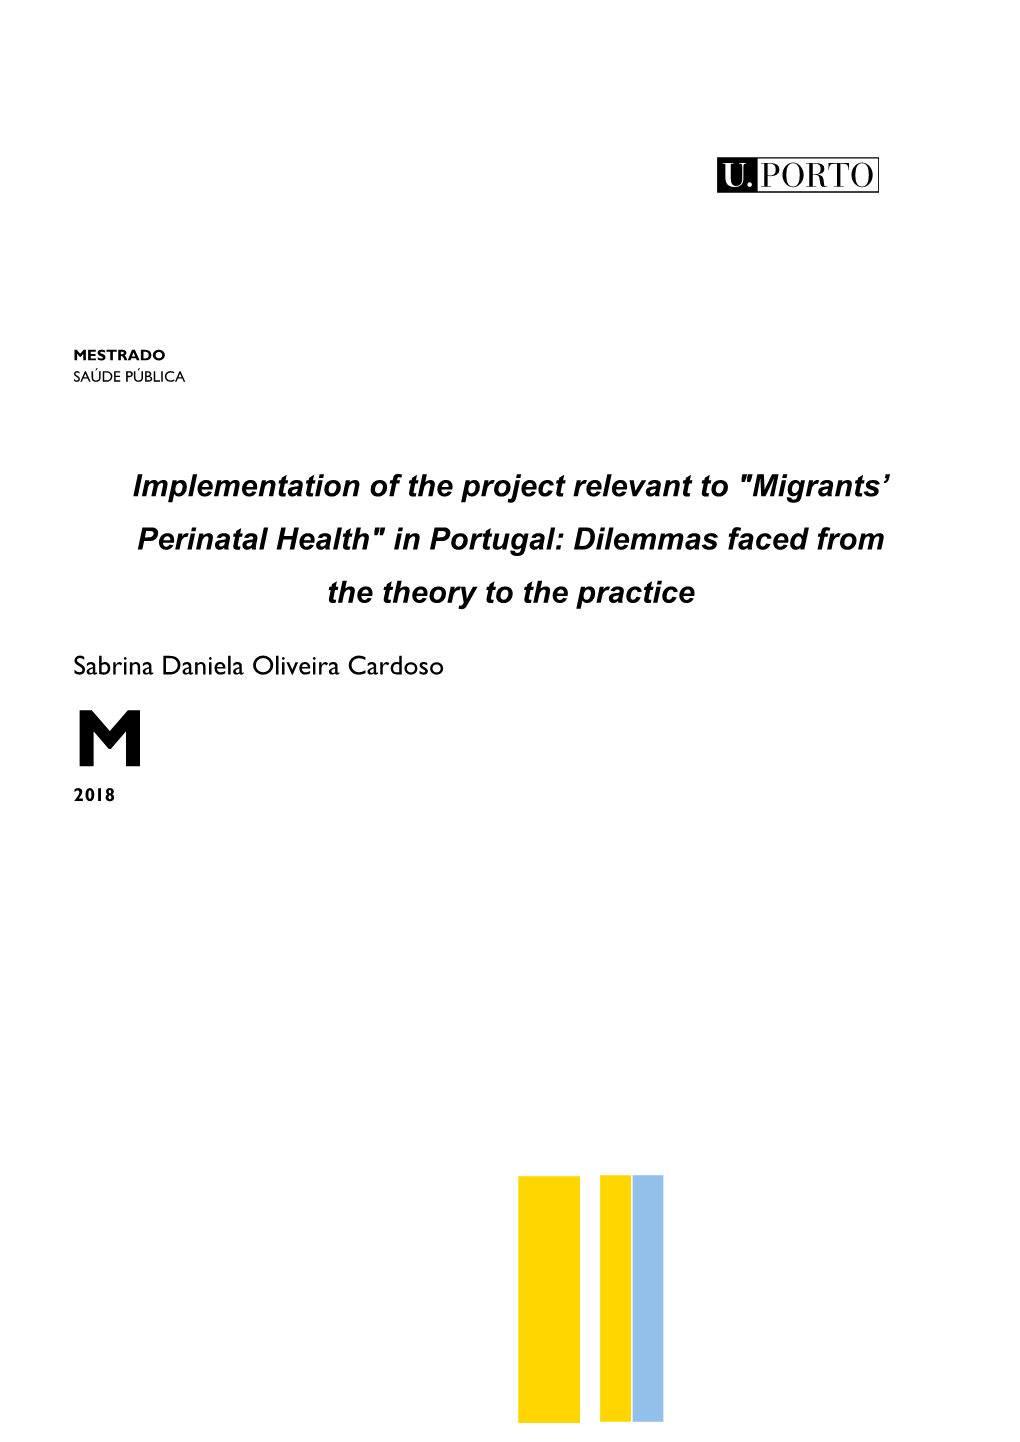 In Portugal: Dilemmas Faced from the Theory to the Practice